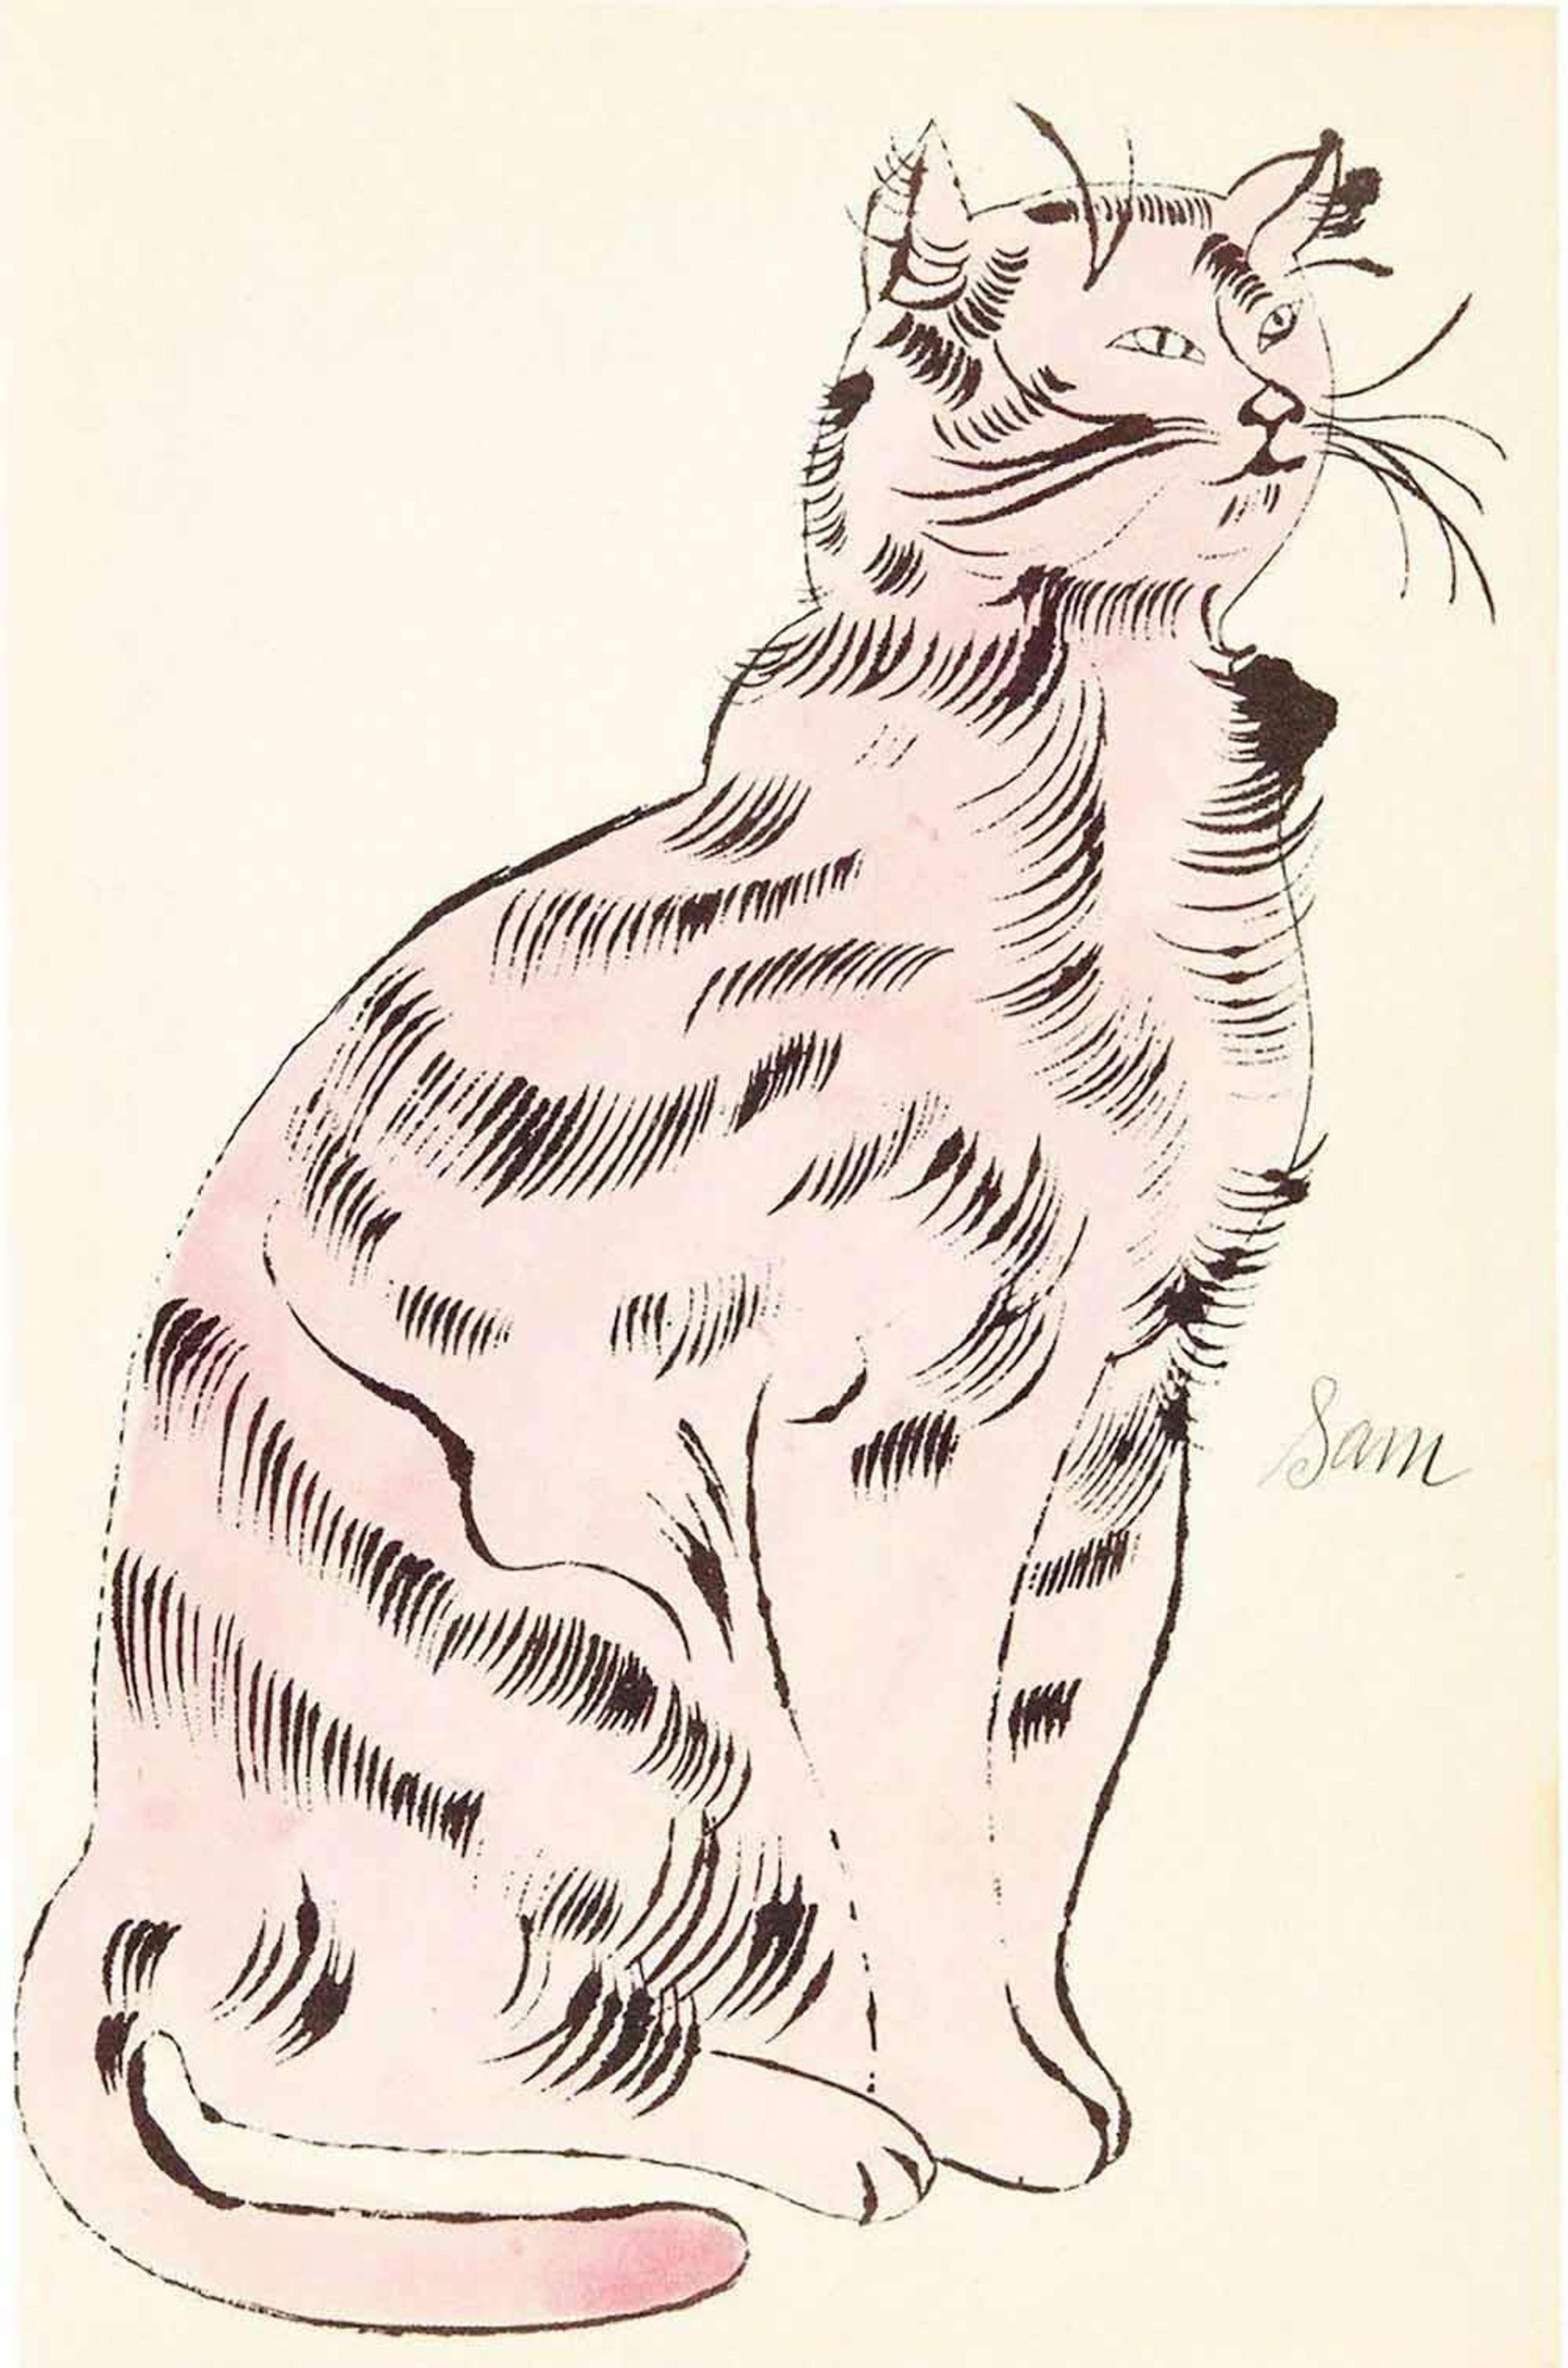 Cats Named Sam IV 56 - Unsigned Print by Andy Warhol 1954 - MyArtBroker